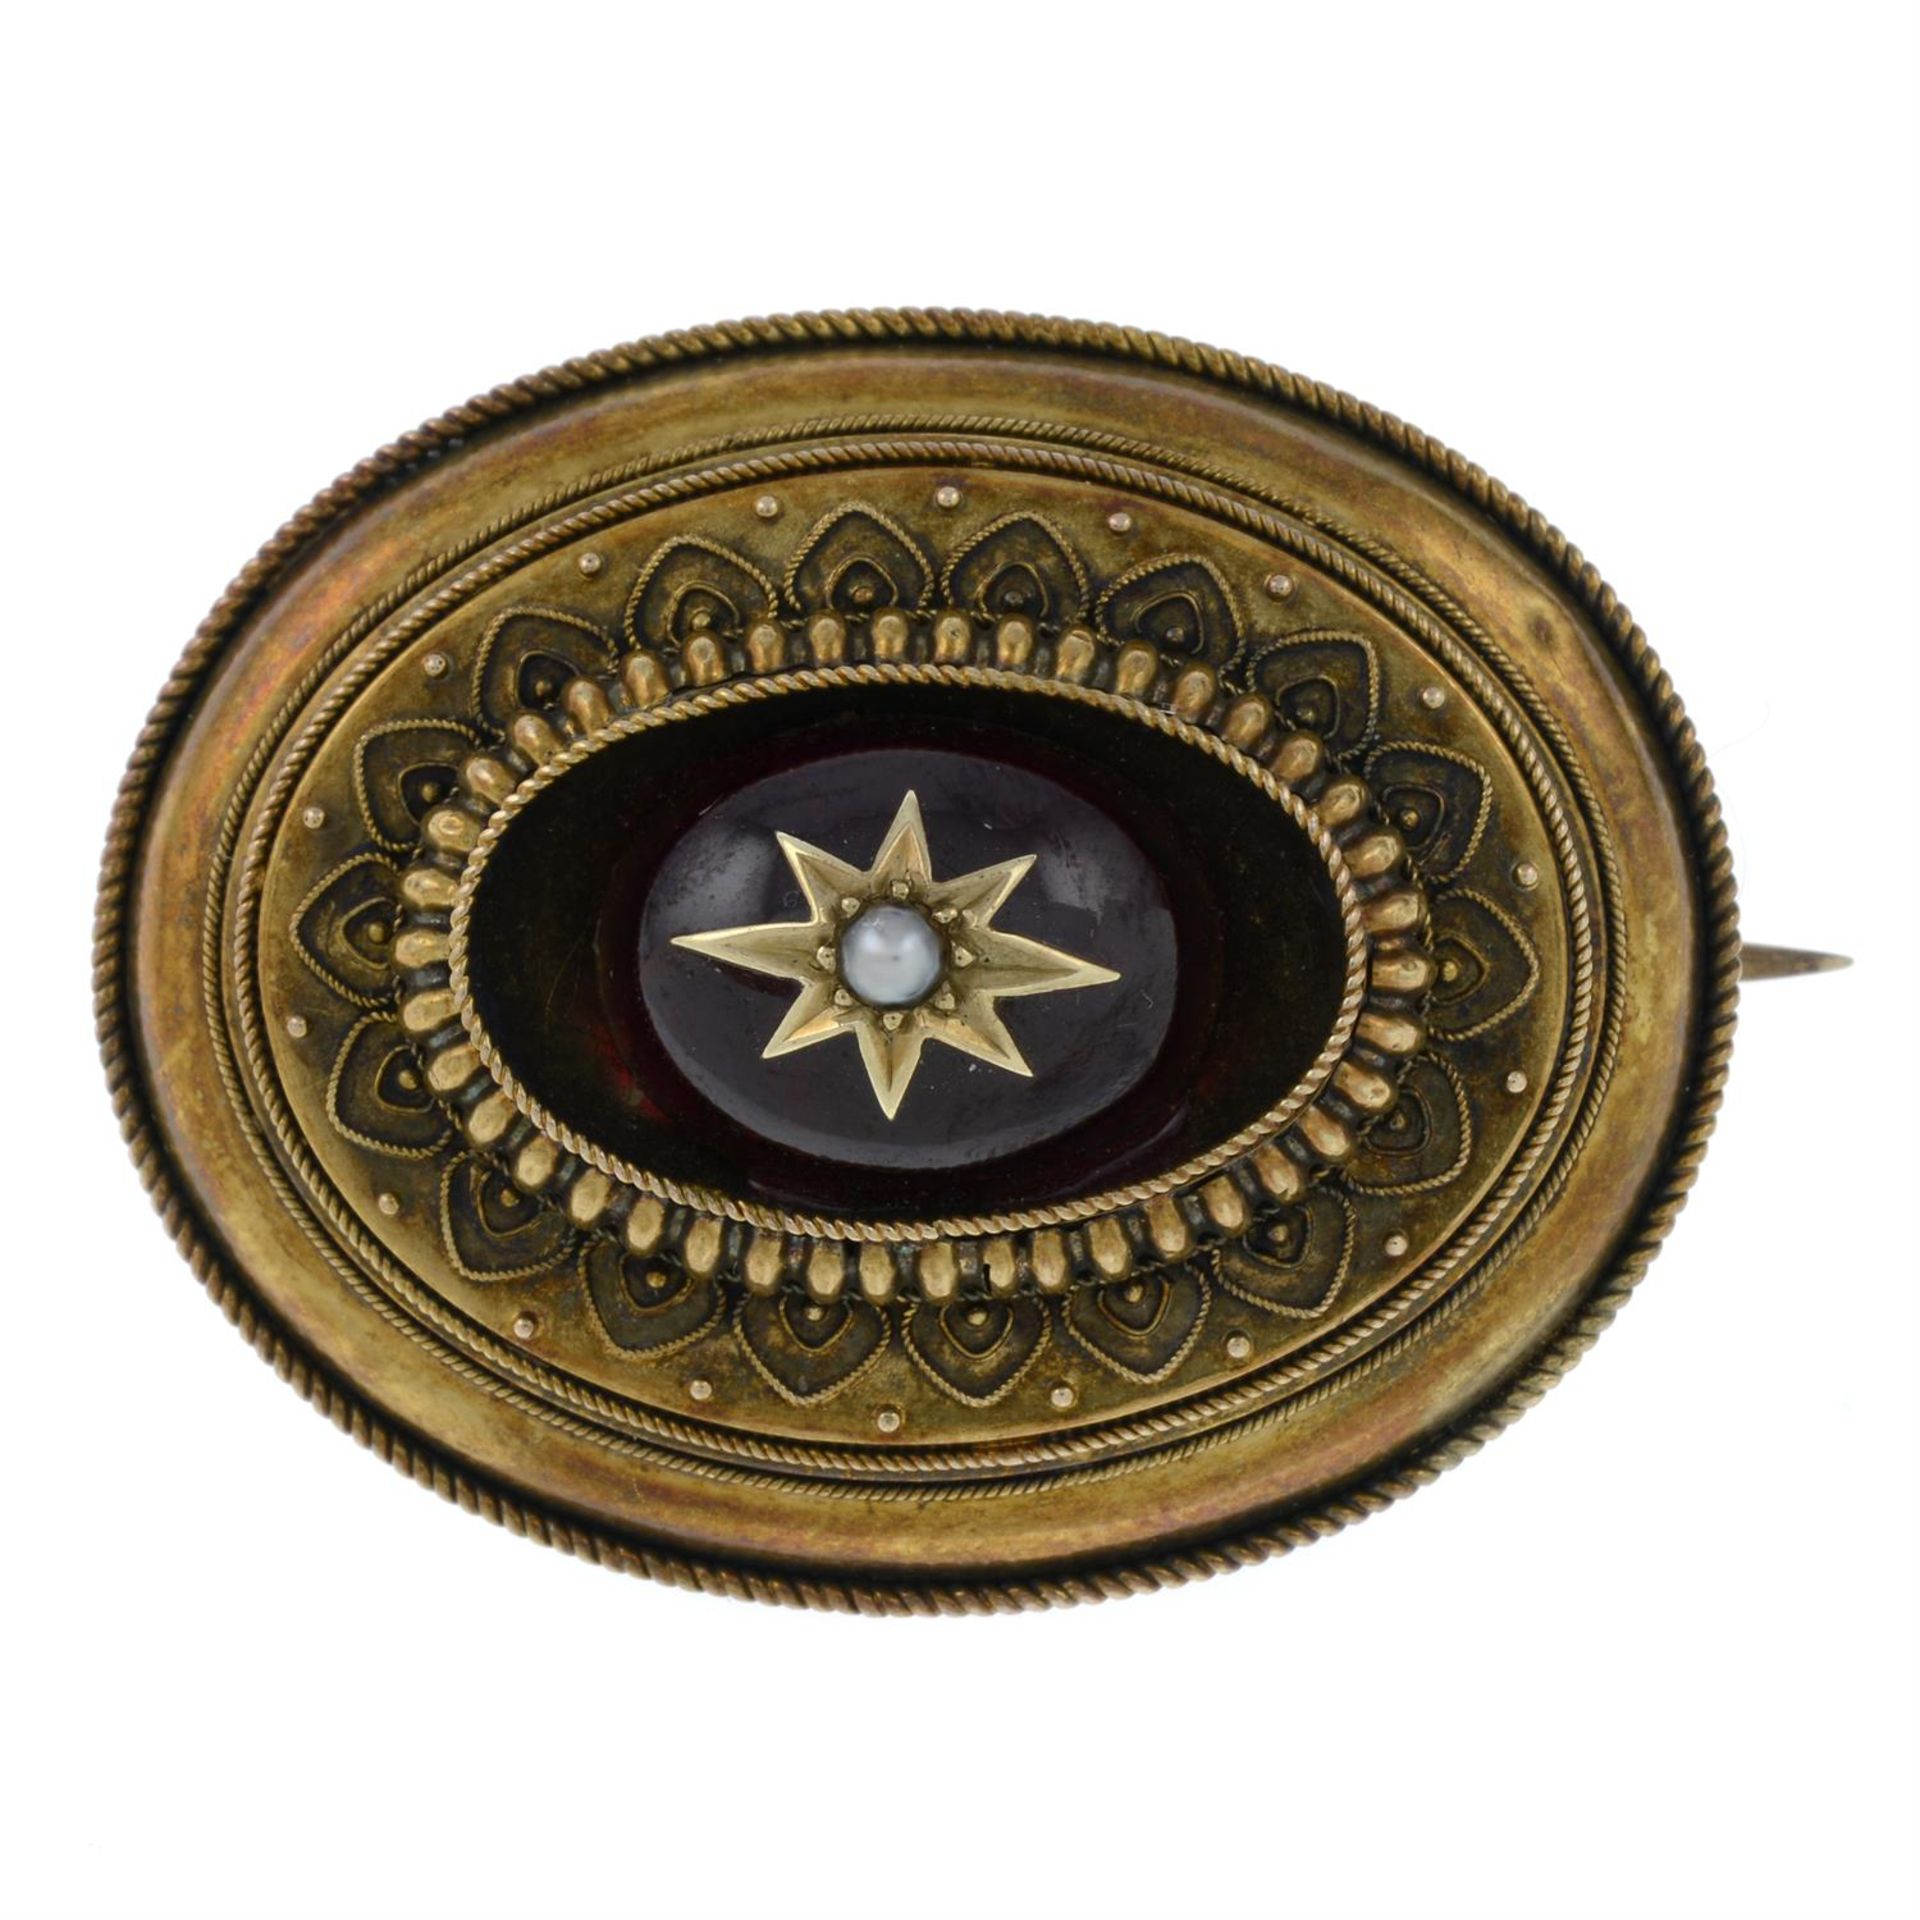 A late 19th century gold, garnet and split pearl brooch.